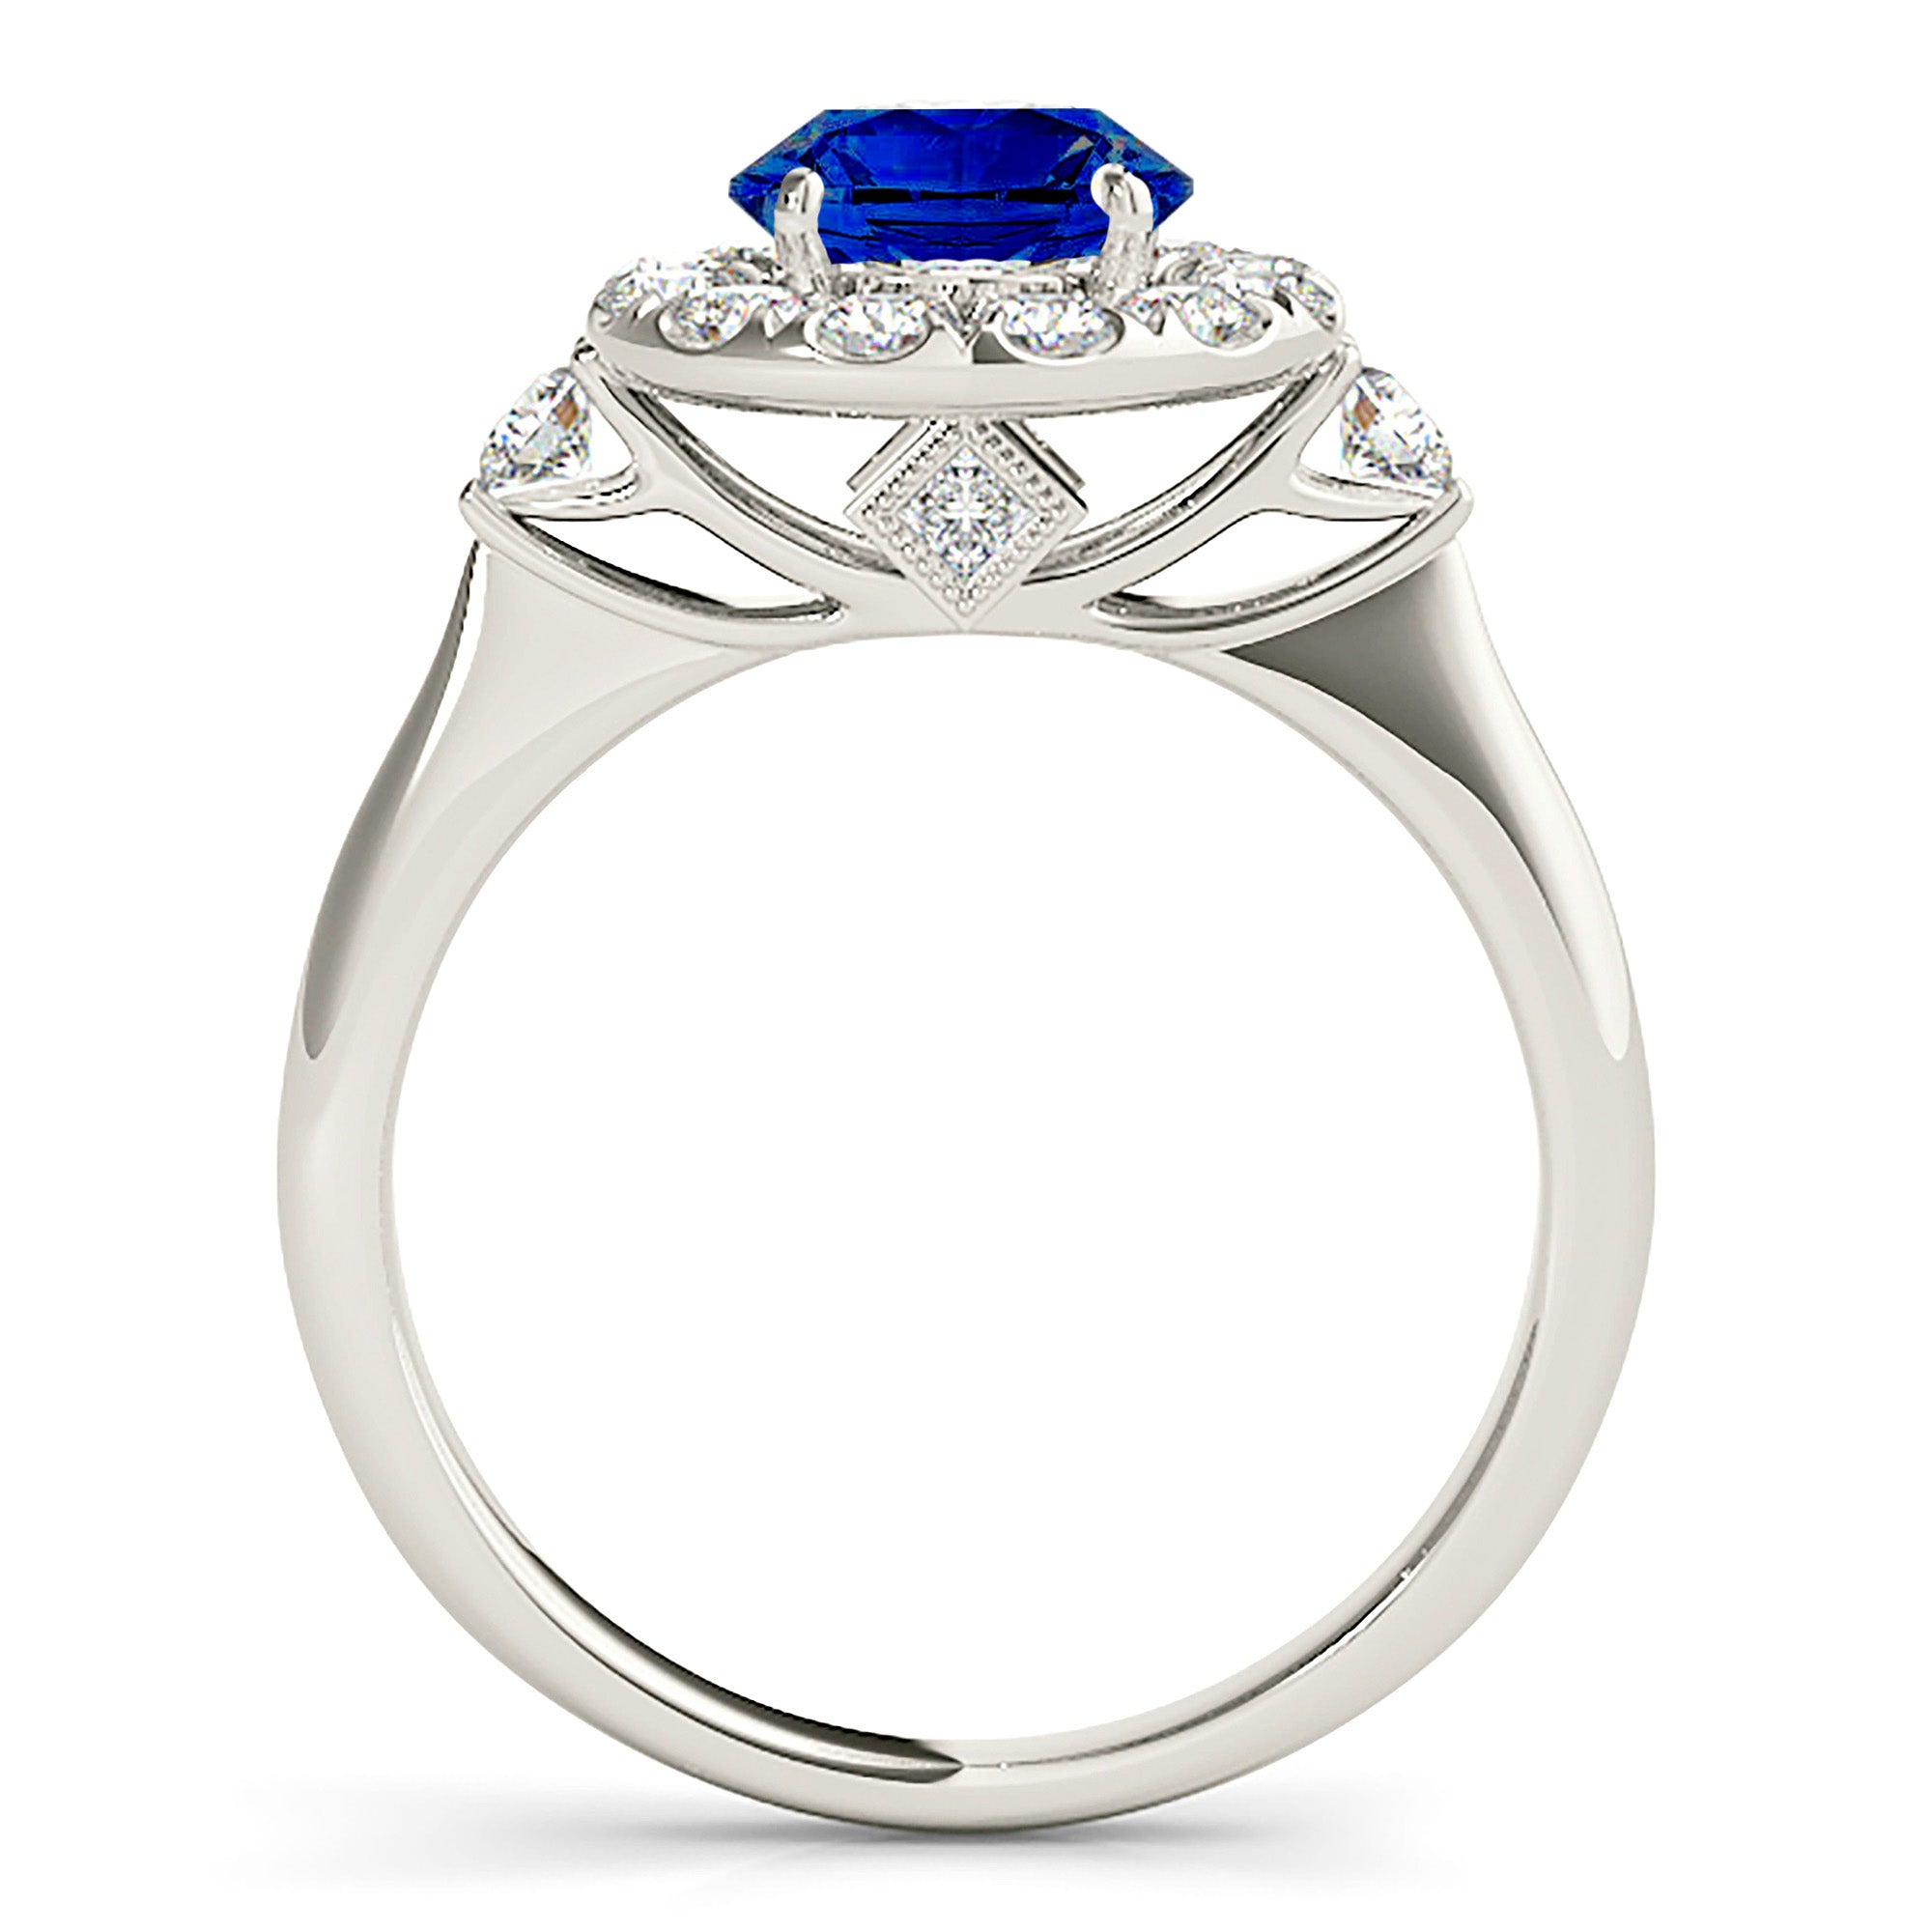 1.35 ct. Genuine Blue Sapphire Ring With 0.40 ctw. Diamond Halo, Two Side Accent Diamonds, Solid Gold Band | Sapphire And Diamond Ring-in 14K/18K White, Yellow, Rose Gold and Platinum - Christmas Jewelry Gift -VIRABYANI